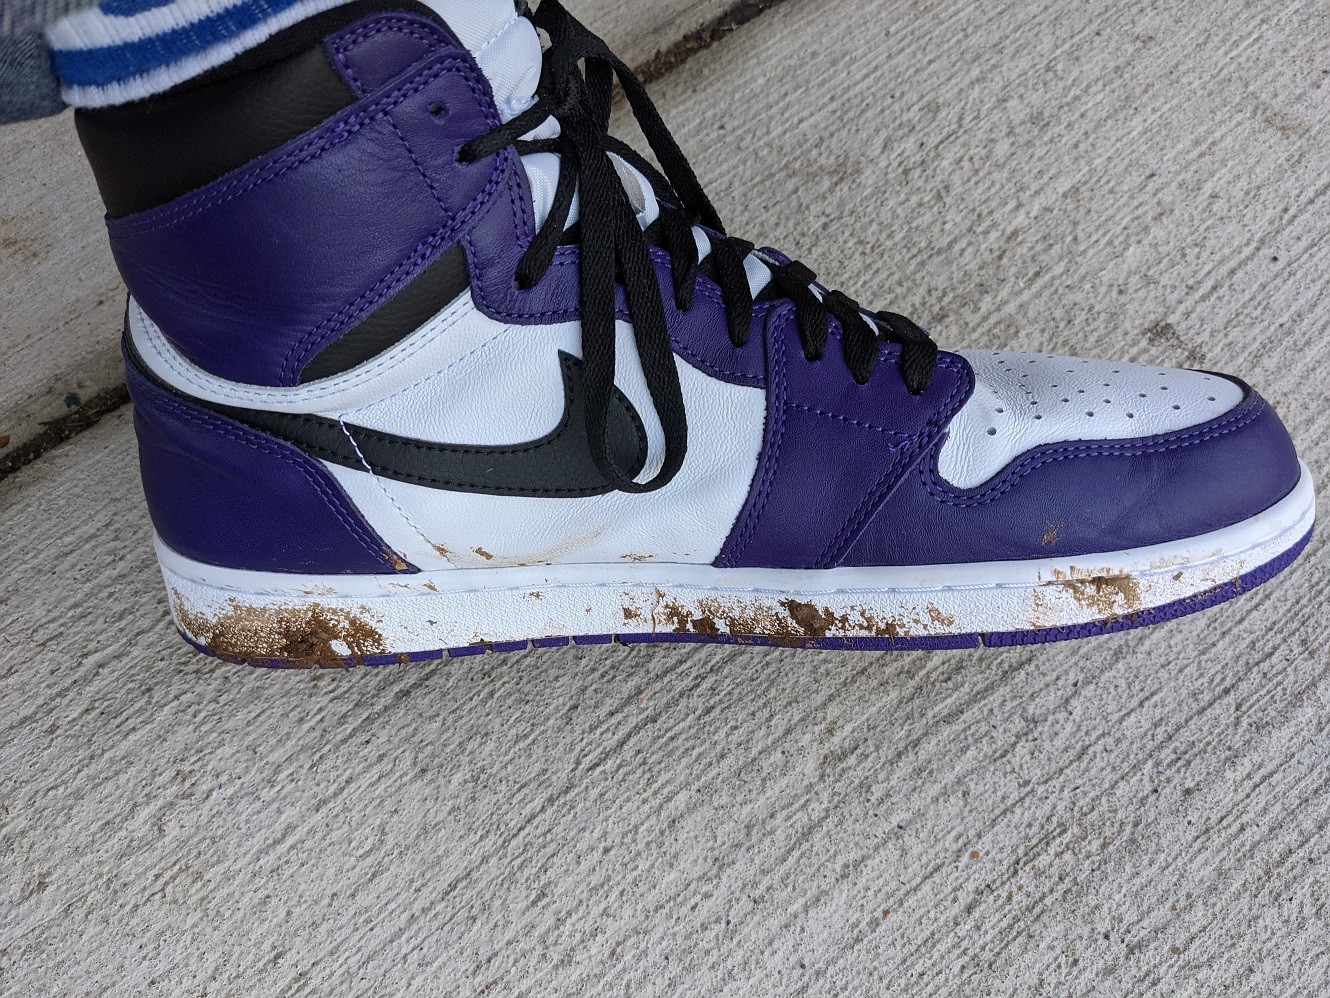 Cleaning Jordan 1’s: You Probably Only Need Water